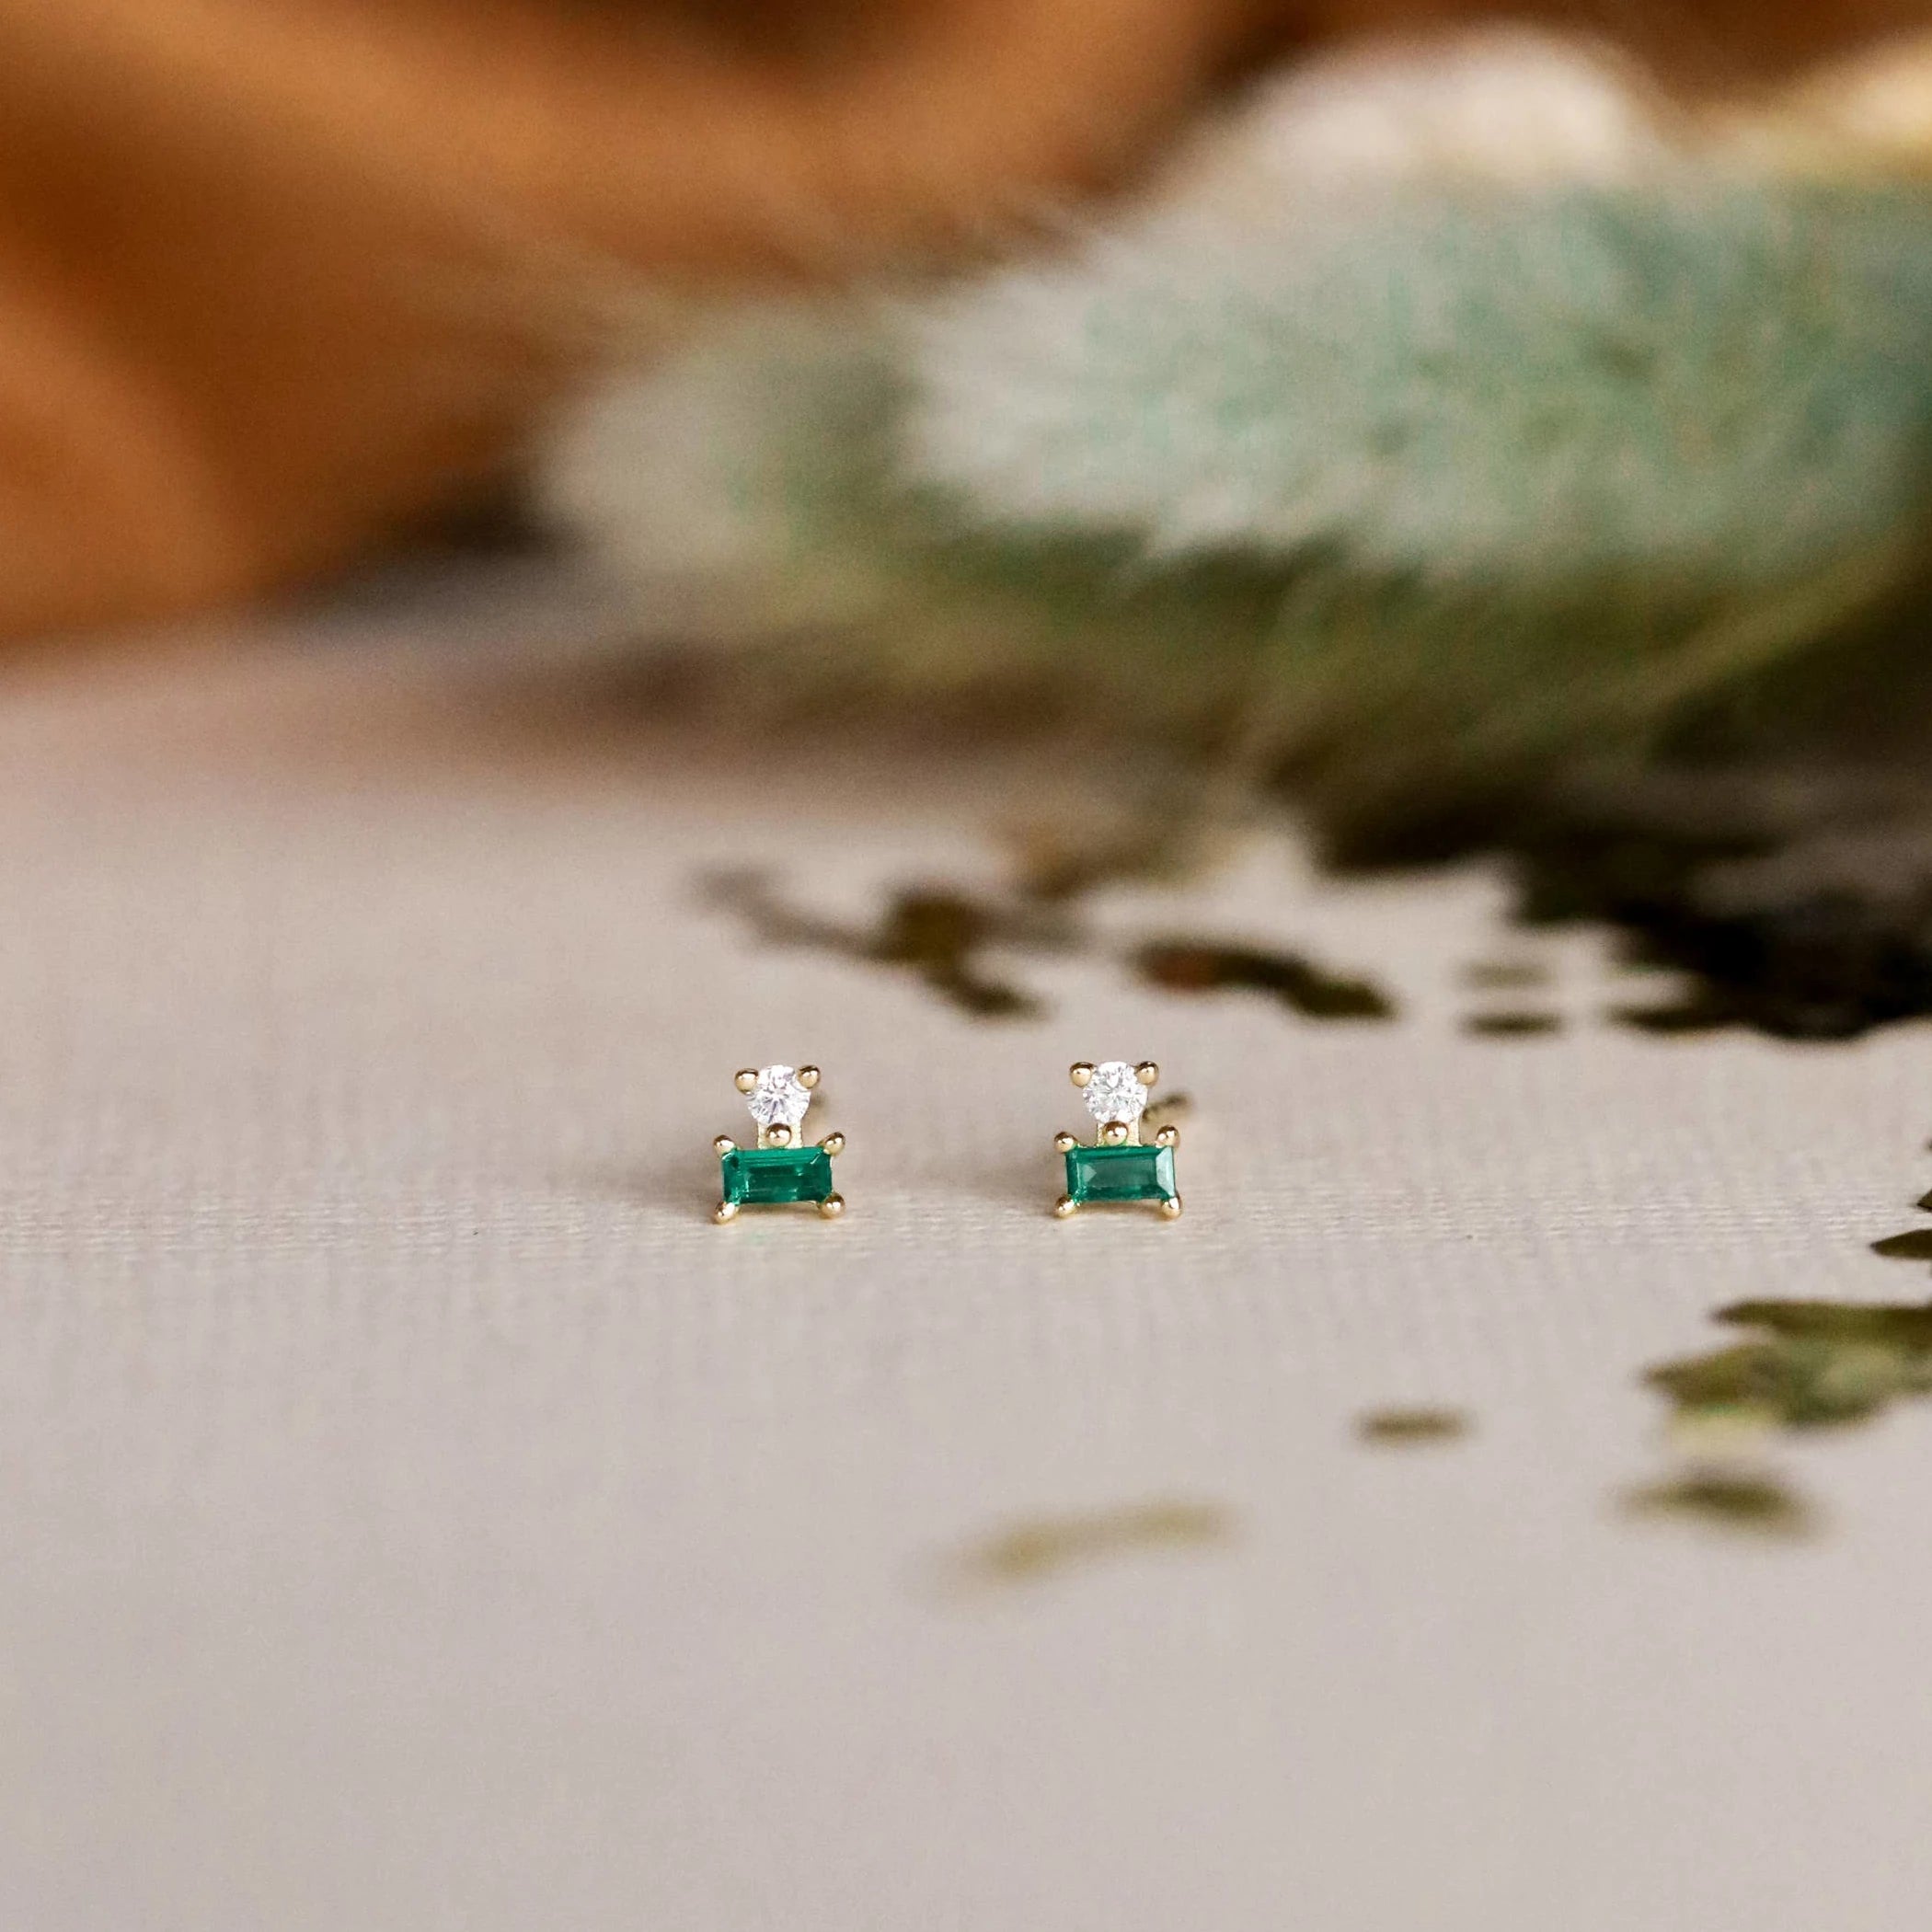 Close up view of the JaxKelly emerald double stud stacked earrings.